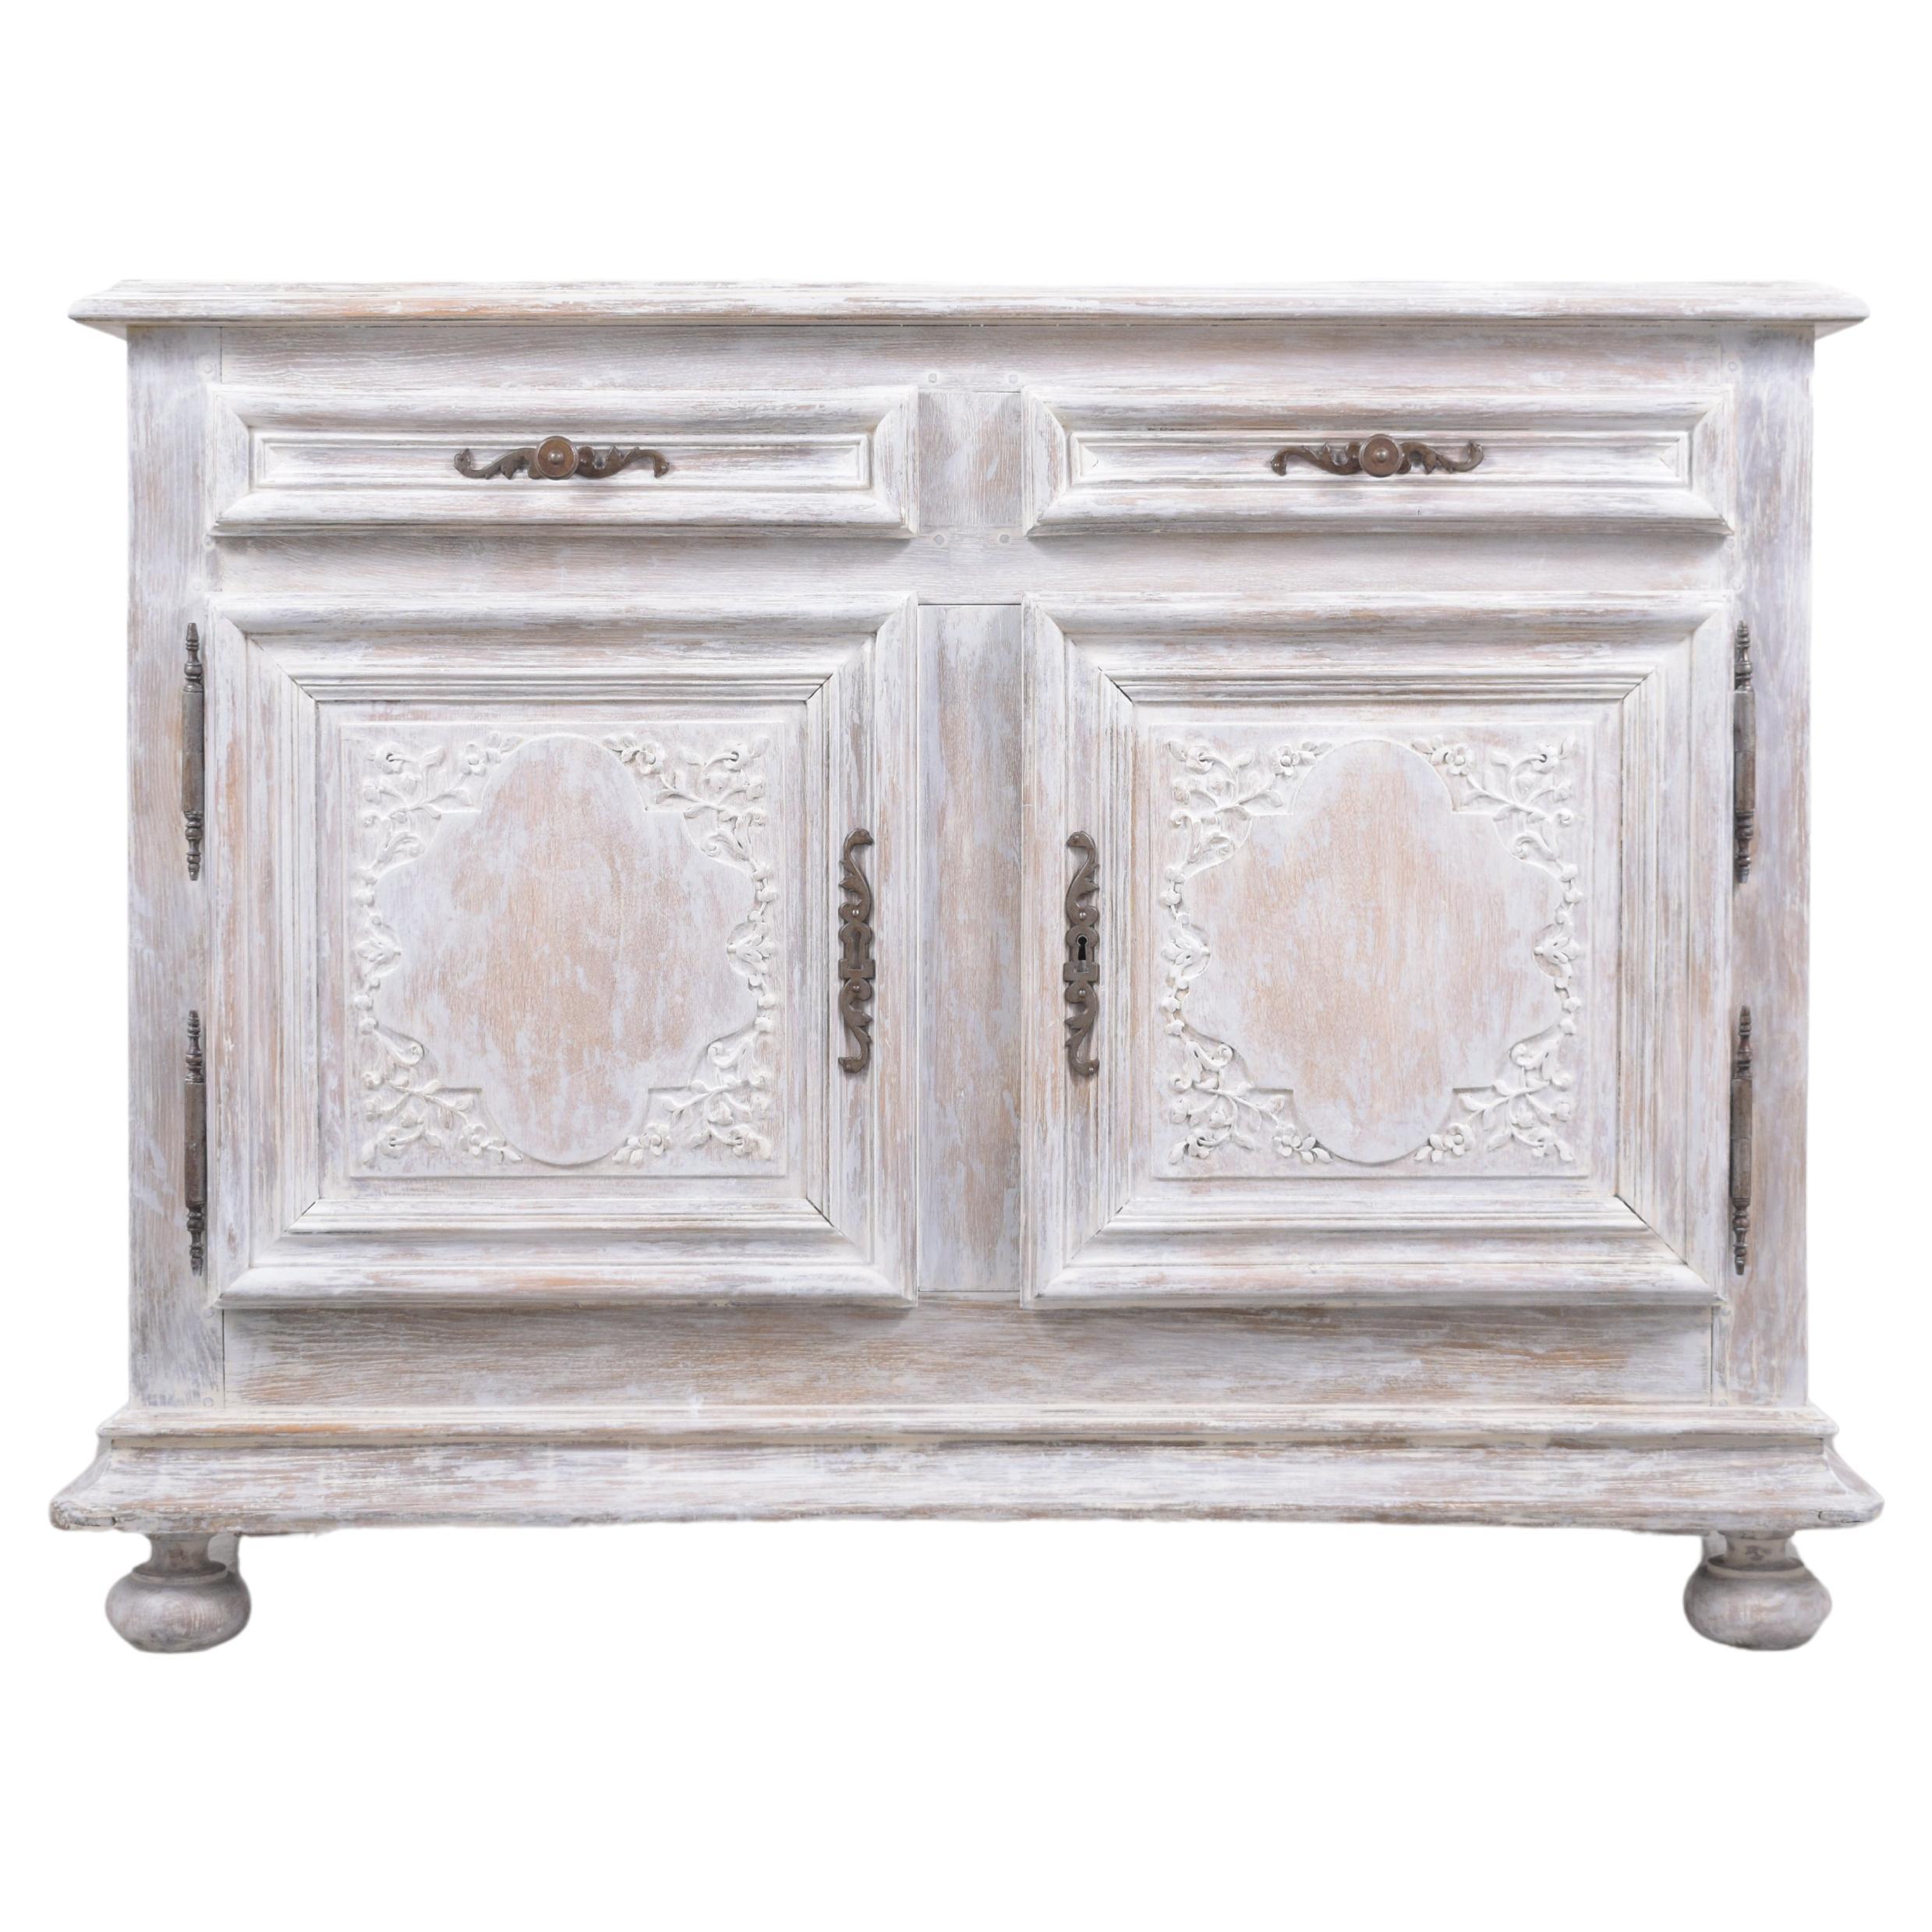 Step into the splendor of the late 19th century with our Jacobean French Buffet, a stunning piece that perfectly encapsulates the era's ethereal charm and elegance. Meticulously restored by our adept in-house team of craftsmen, this antique